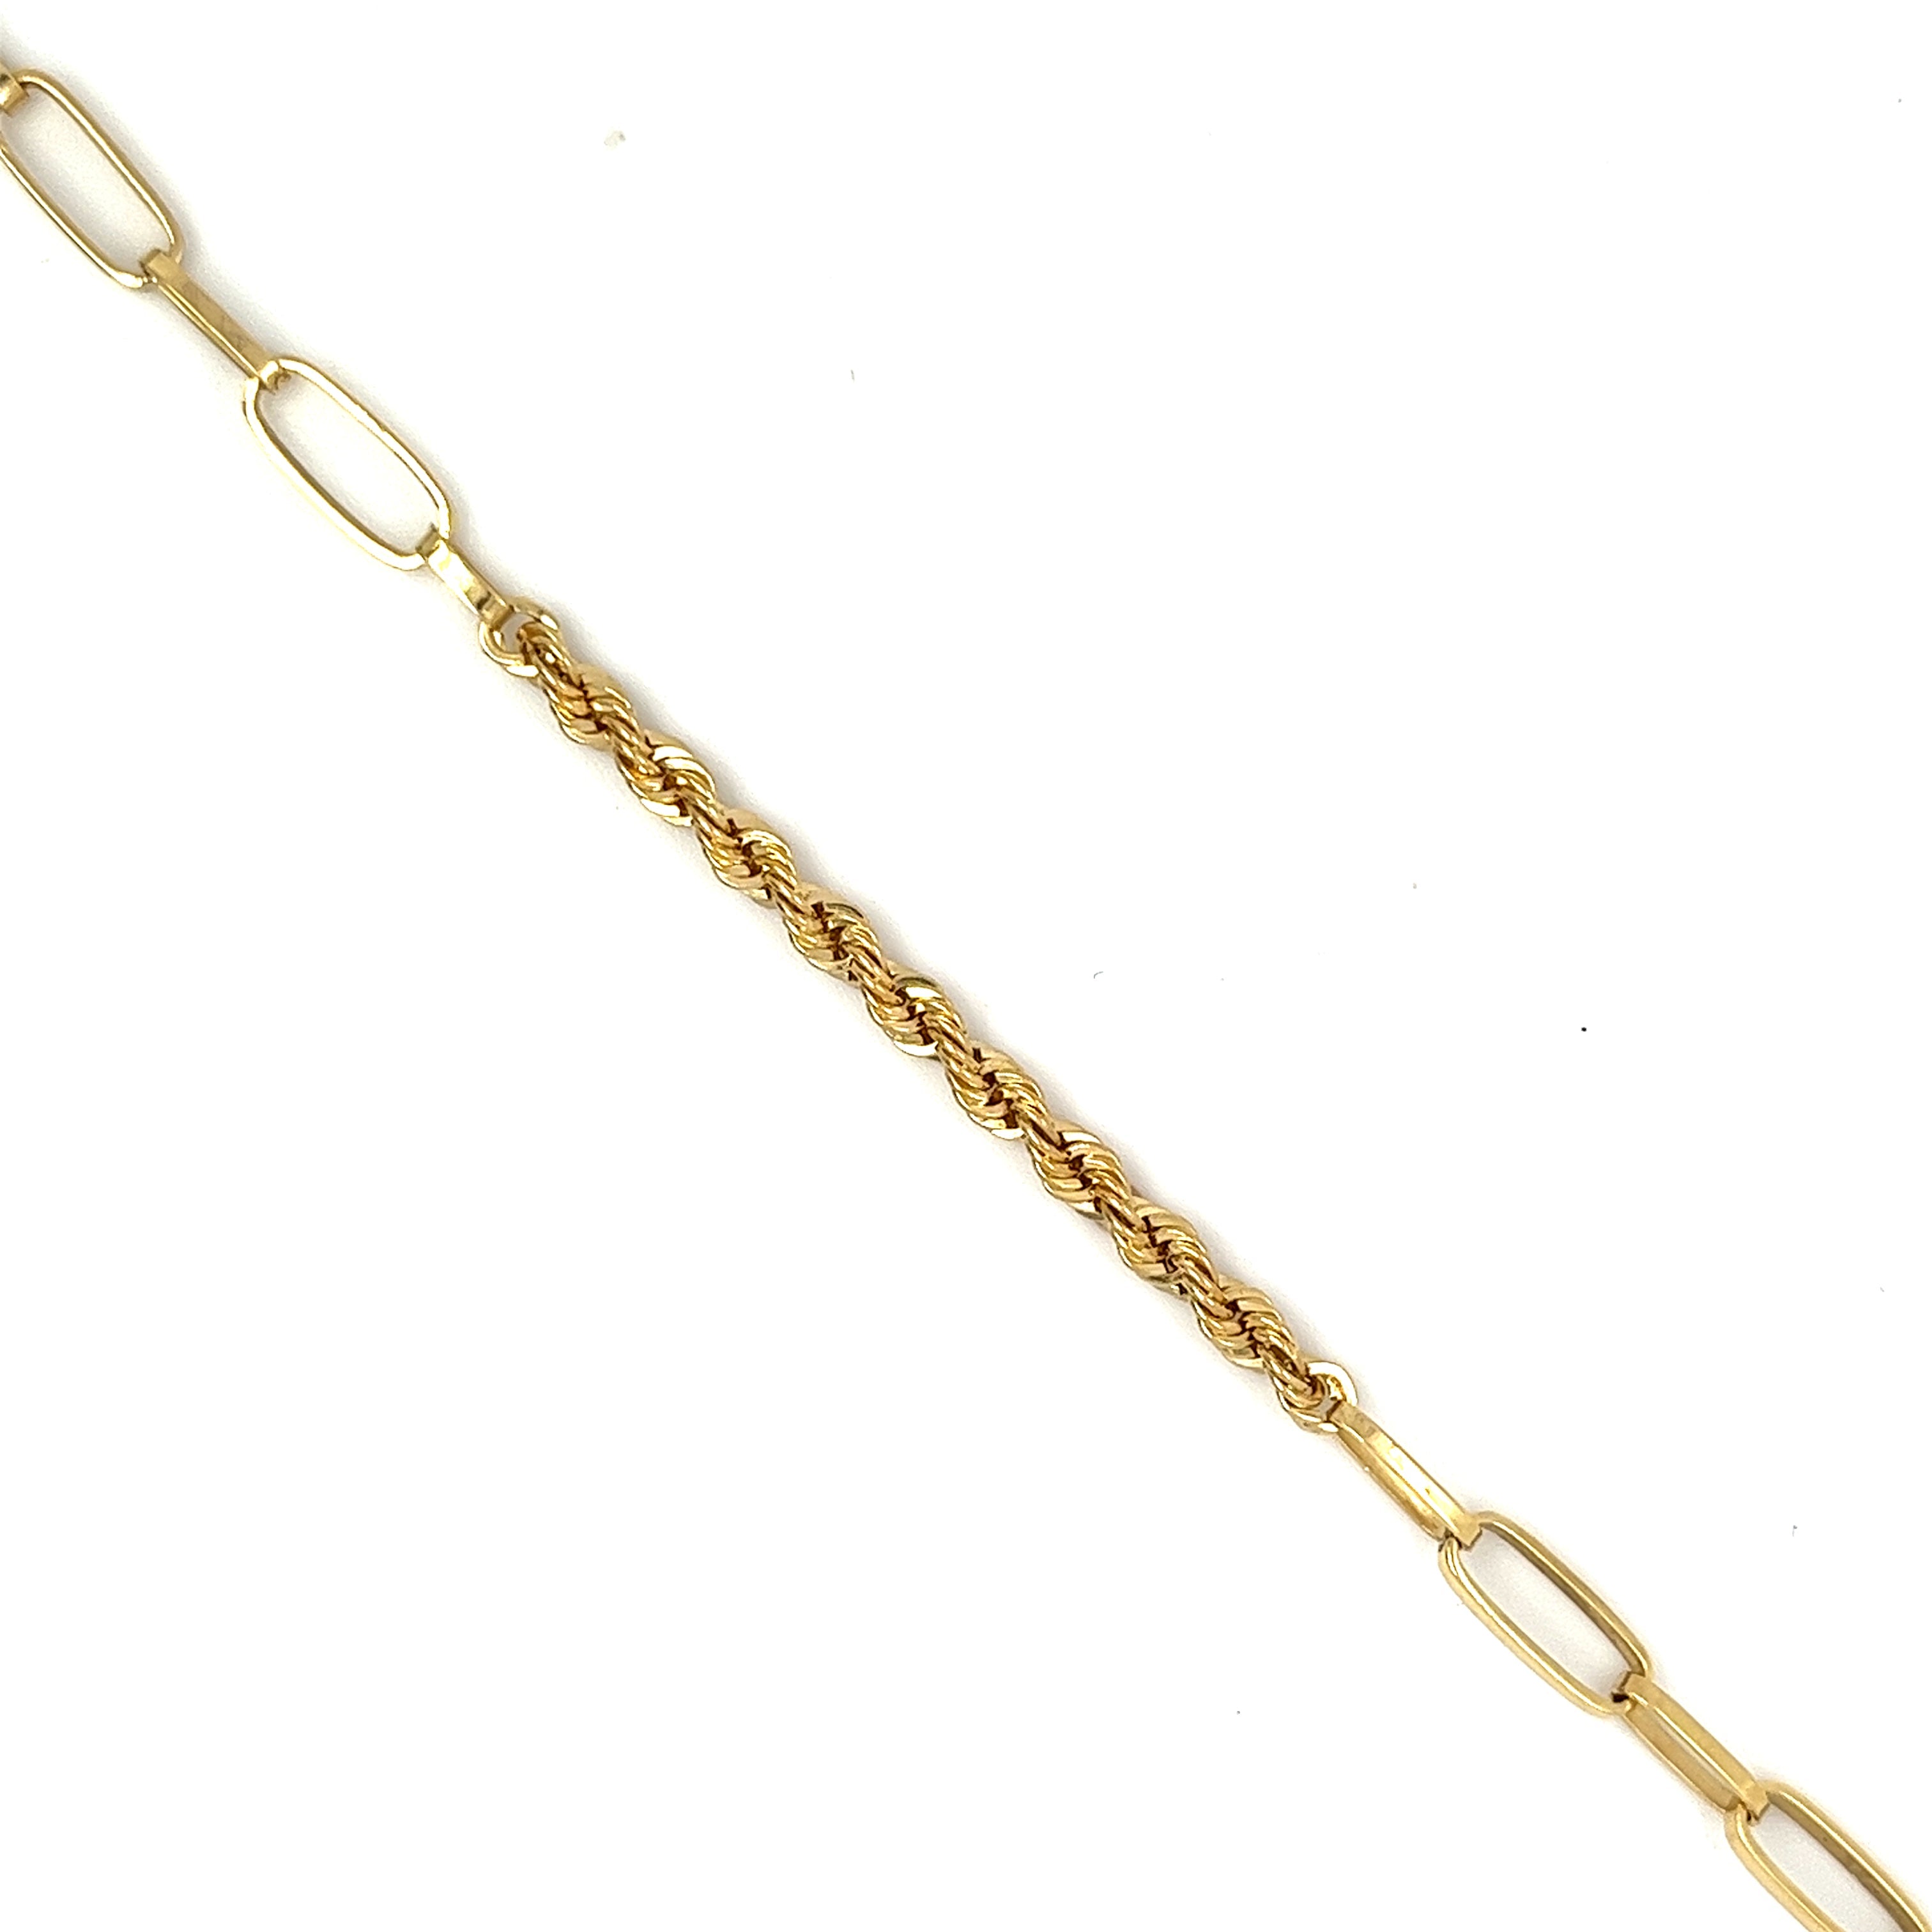 Magnificent Gold Linglong Bracelet with barids in 18K Yellow gold / MFT038B/Y